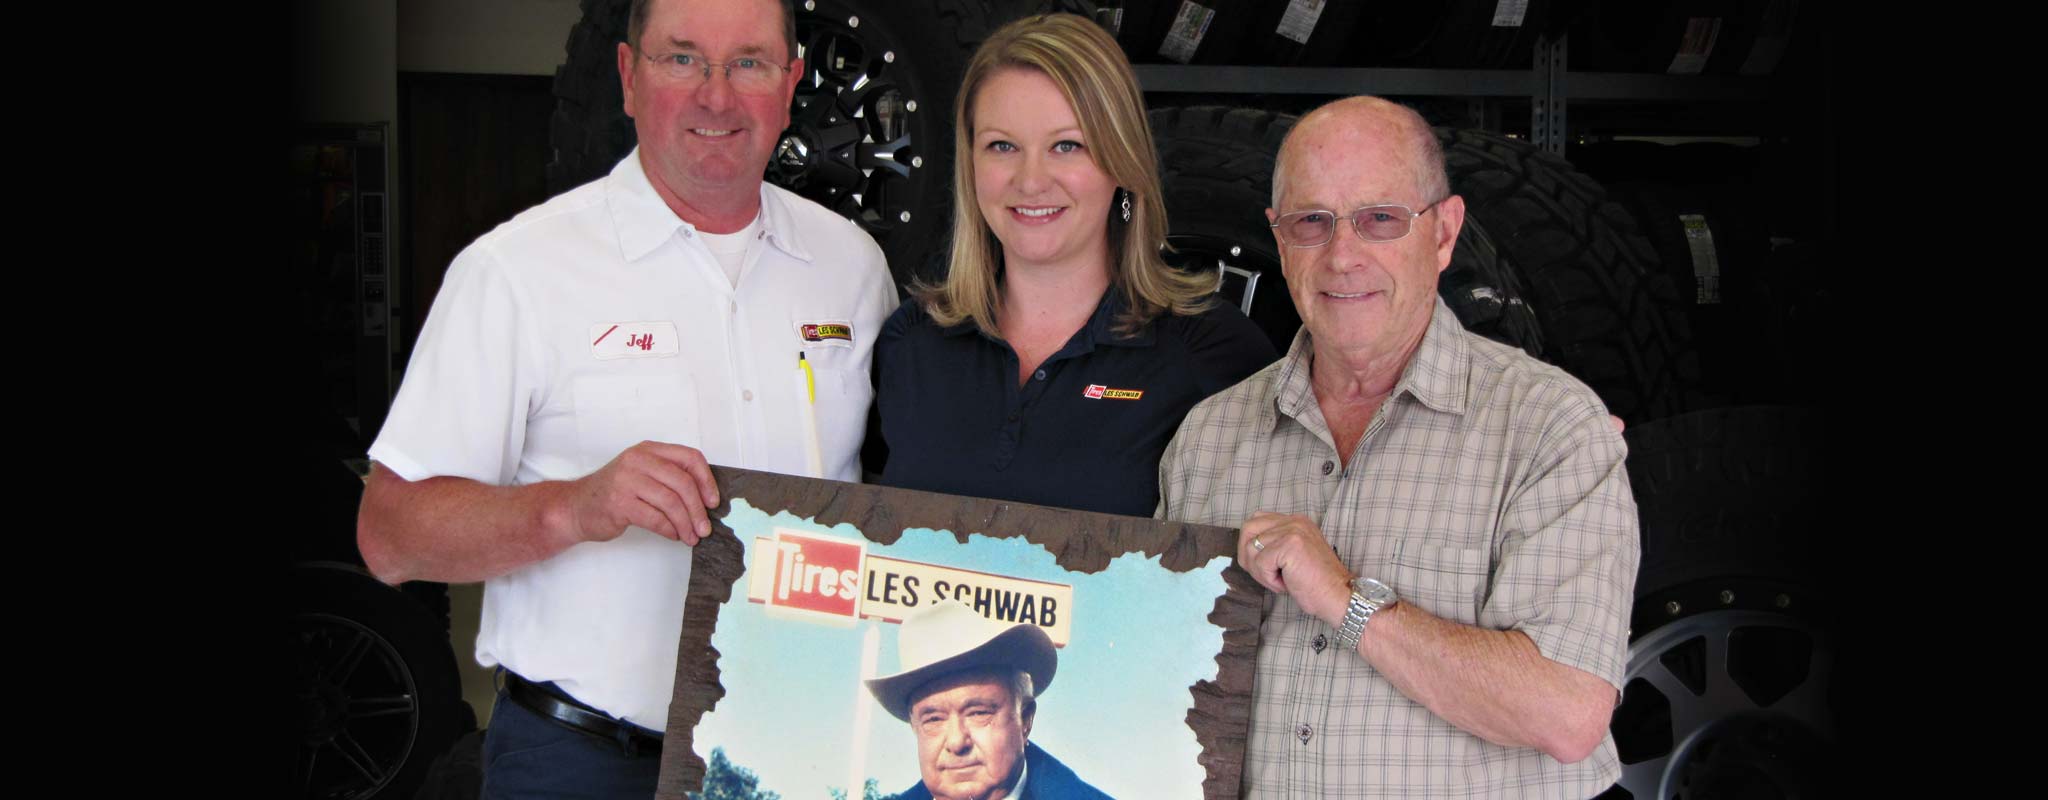 Three generations of Les Schwab employees: Christy Davison, her father Jeff James and her grandfather Gary Brown.